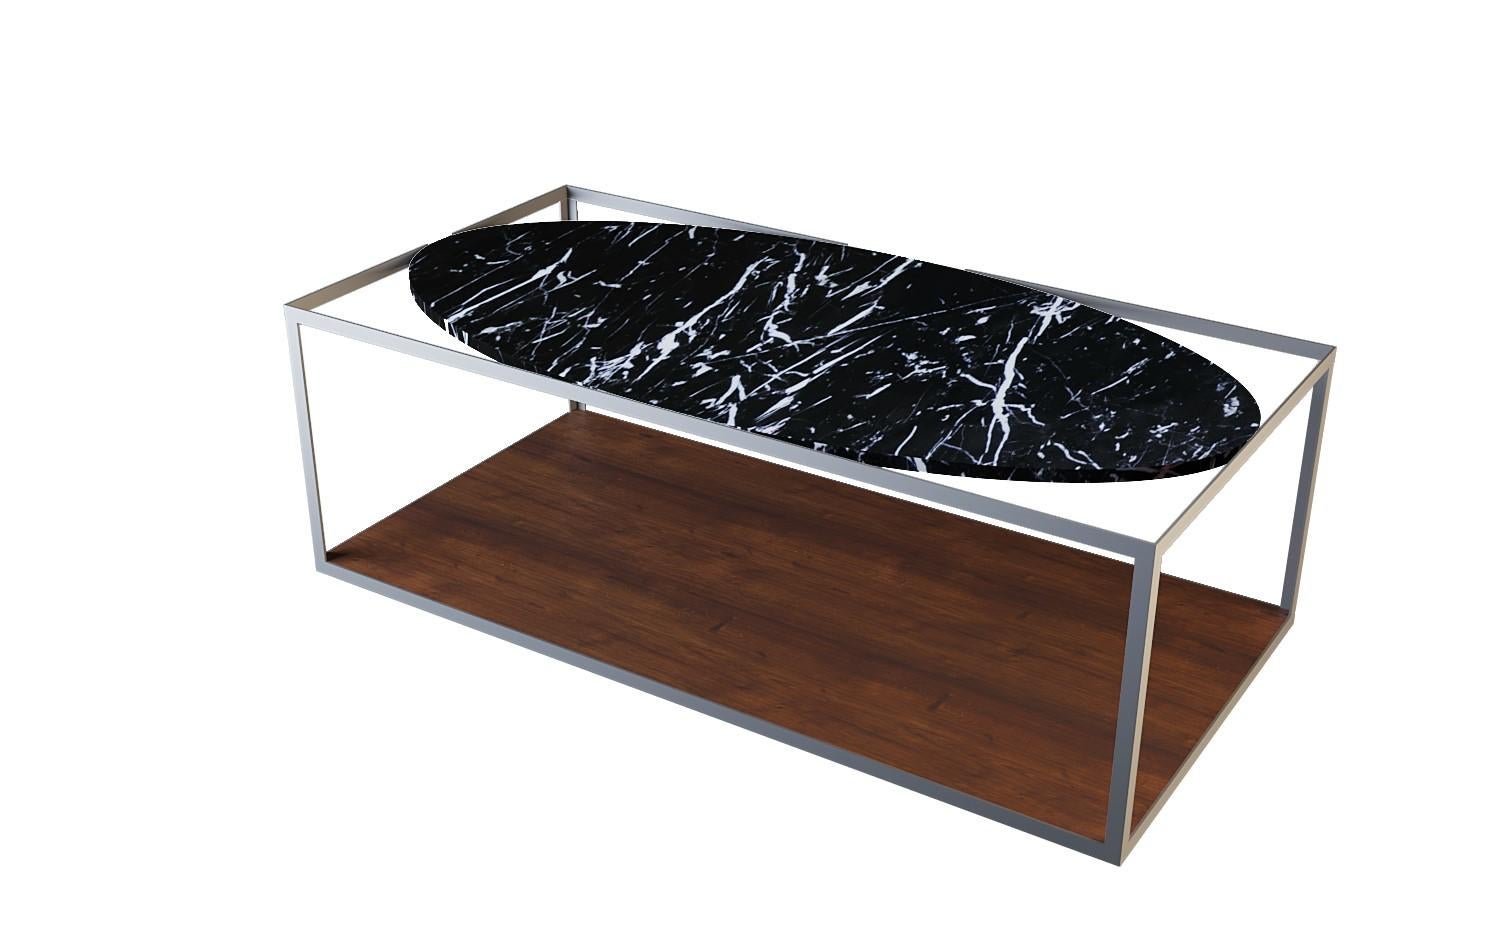 𝗣𝗿𝗼𝗱𝘂𝗰𝘁 𝗗𝗲𝘁𝗮𝗶𝗹𝘀:
NORDST GAARD Coffee Table from Italian Grey Rain Marble, Danish Modern Design, New

Harmonious rupture between rigid frames and curved tabletops. A game of geometrical shapes designed to include and balance basic forms